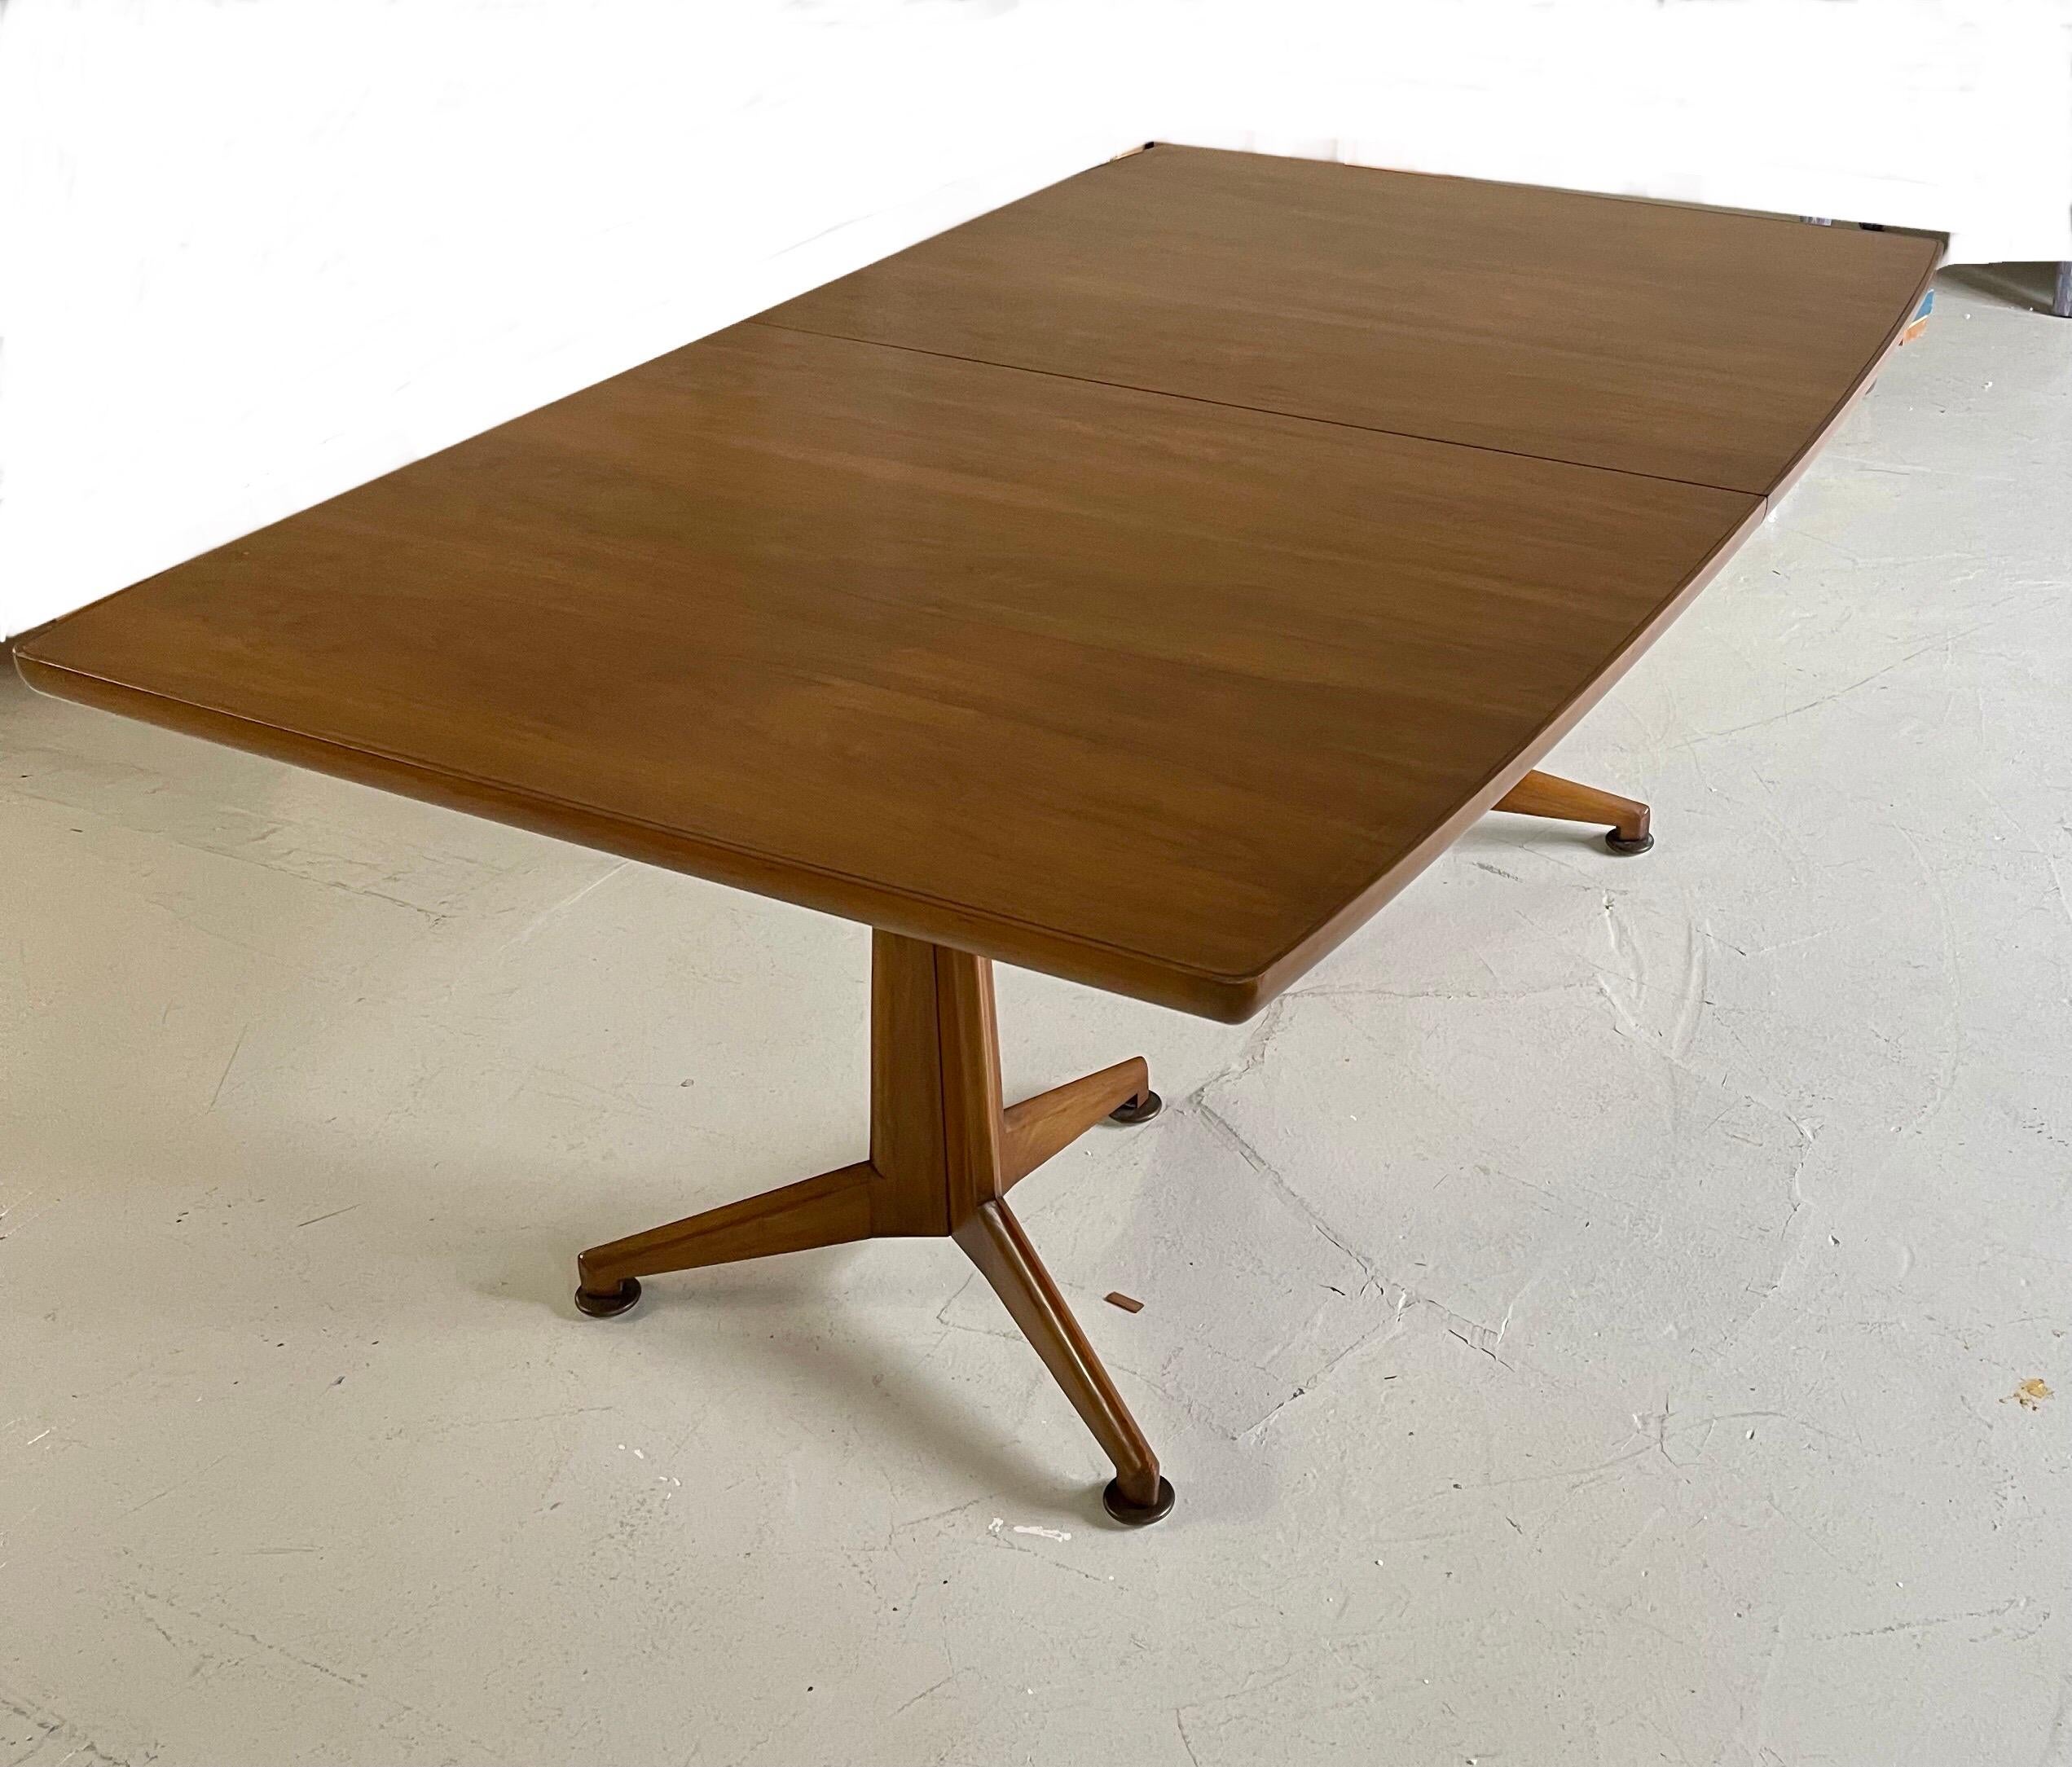 A John Widdicomb 2 pedestal Walnut Dining Table with 3 leaves, original storage create & table pads

Measures: Total length with 3 leaves in 127’’ or 10 foot 7 inches total.